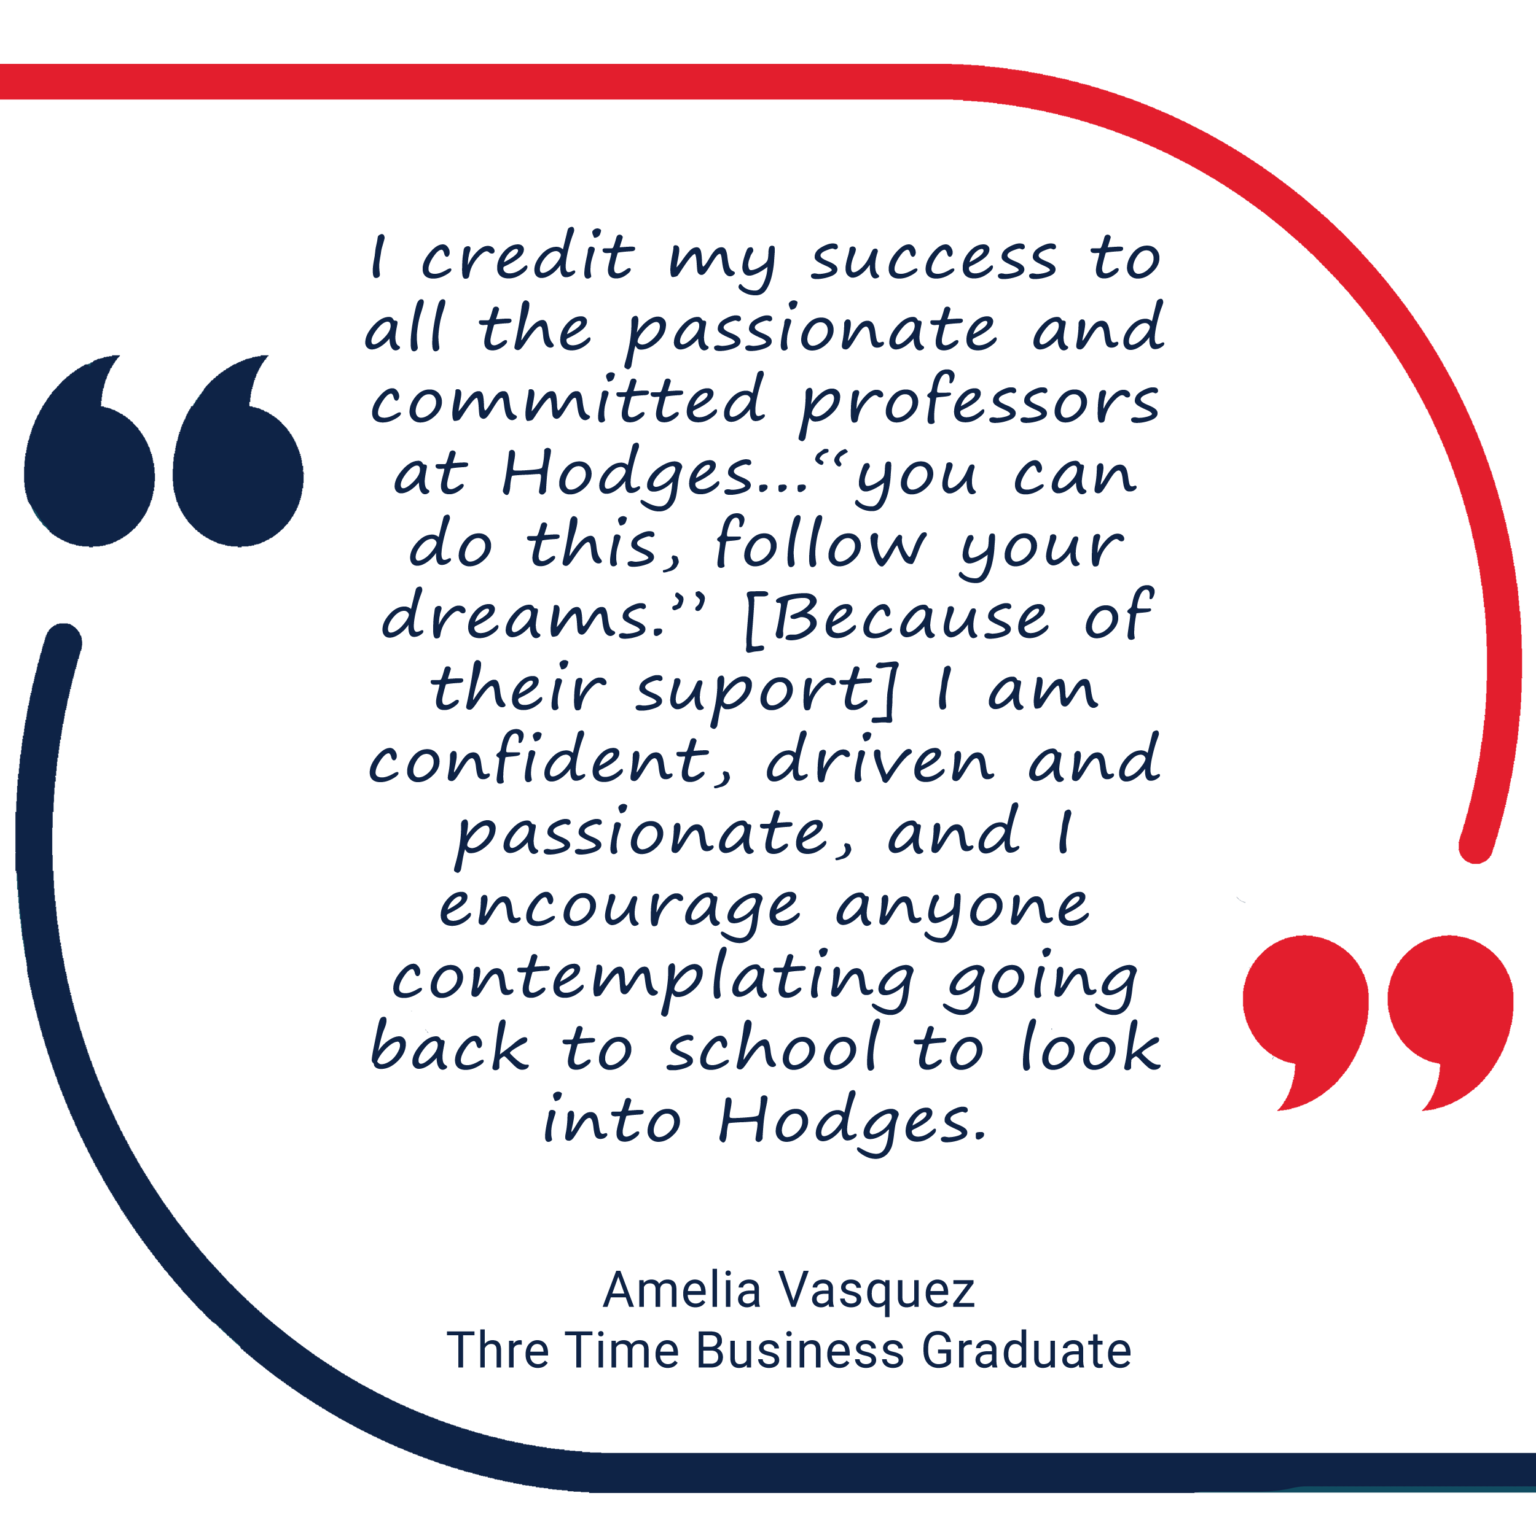 Quote from Amelia Vasquez, a three time business graduate